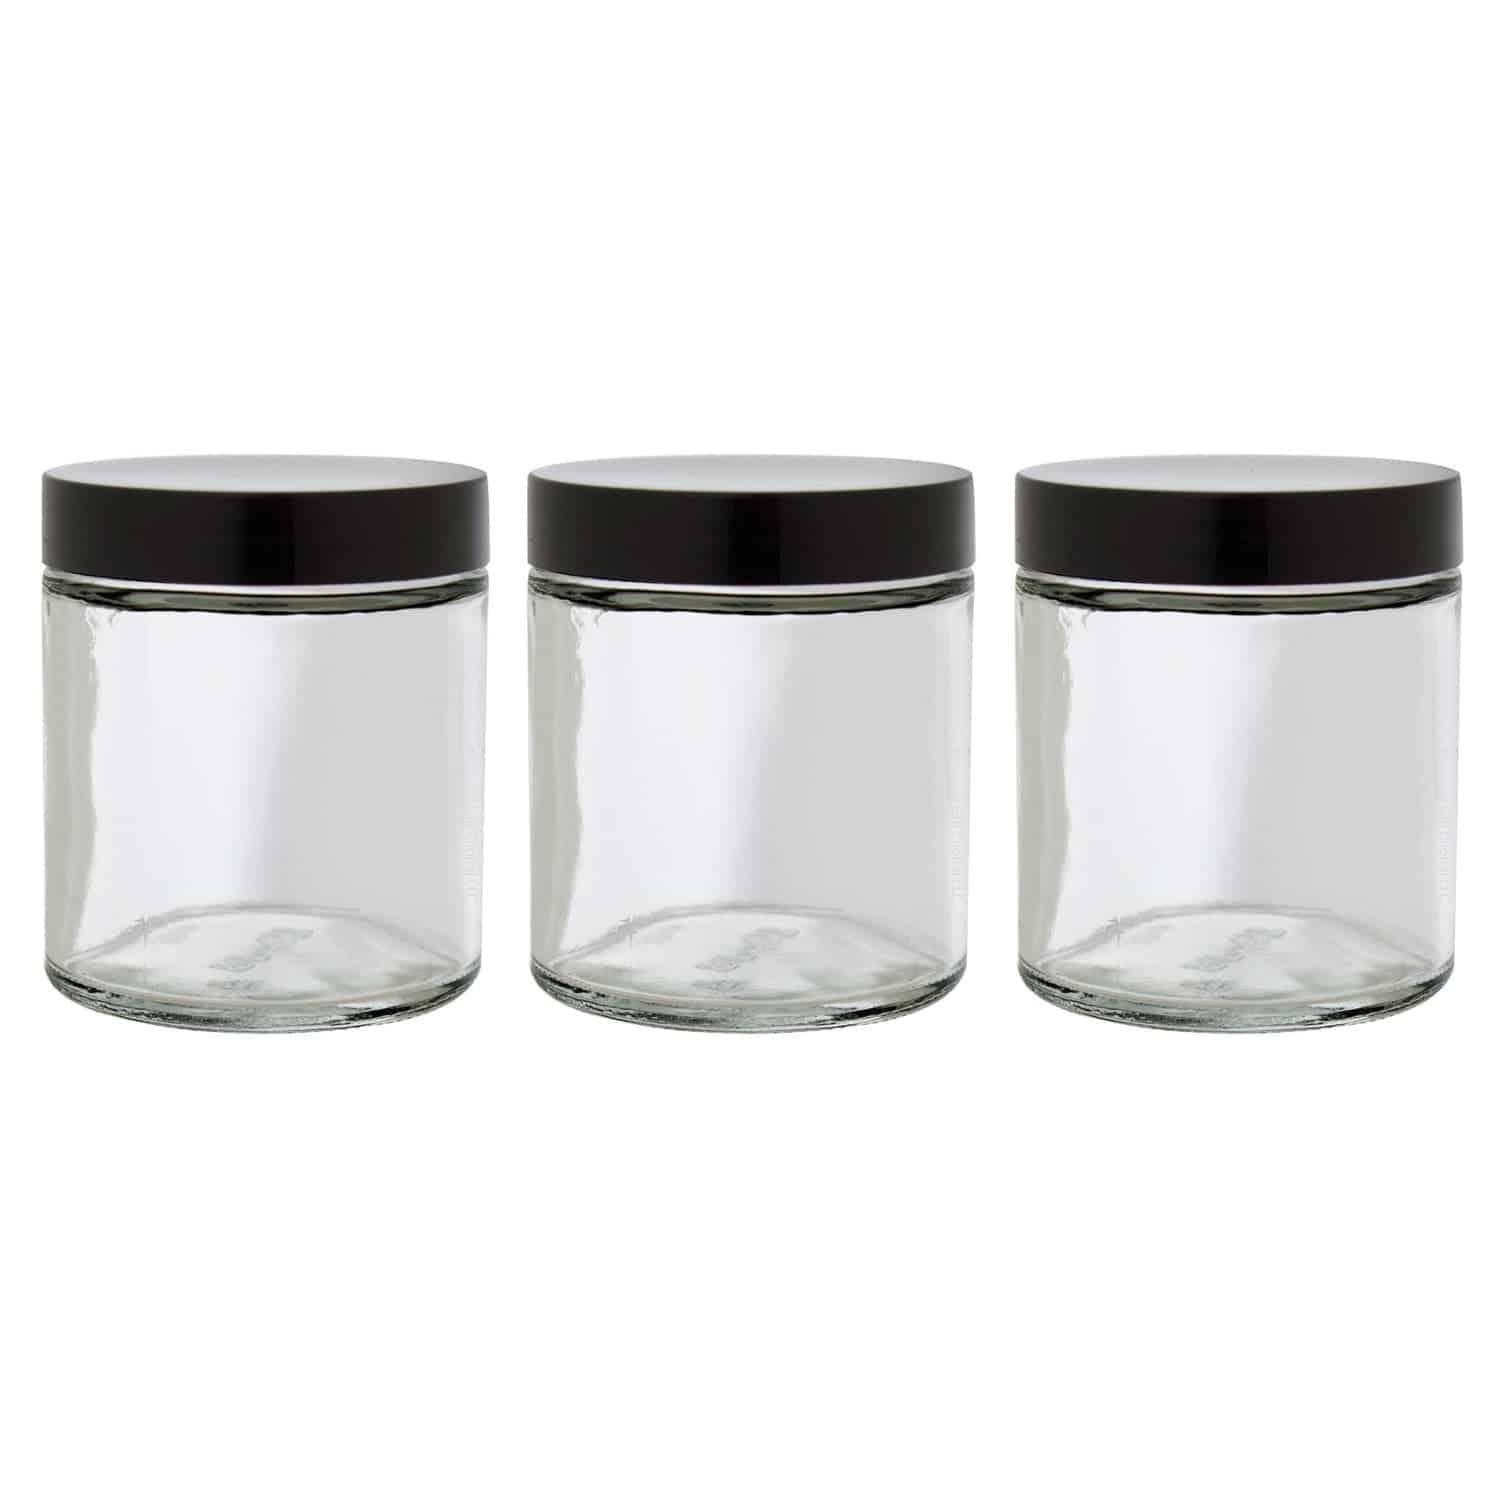 Awesome Crafting Blanks You Can Get on Amazon Prime : Glass Kitchen Jar | www.thepinningmama.com